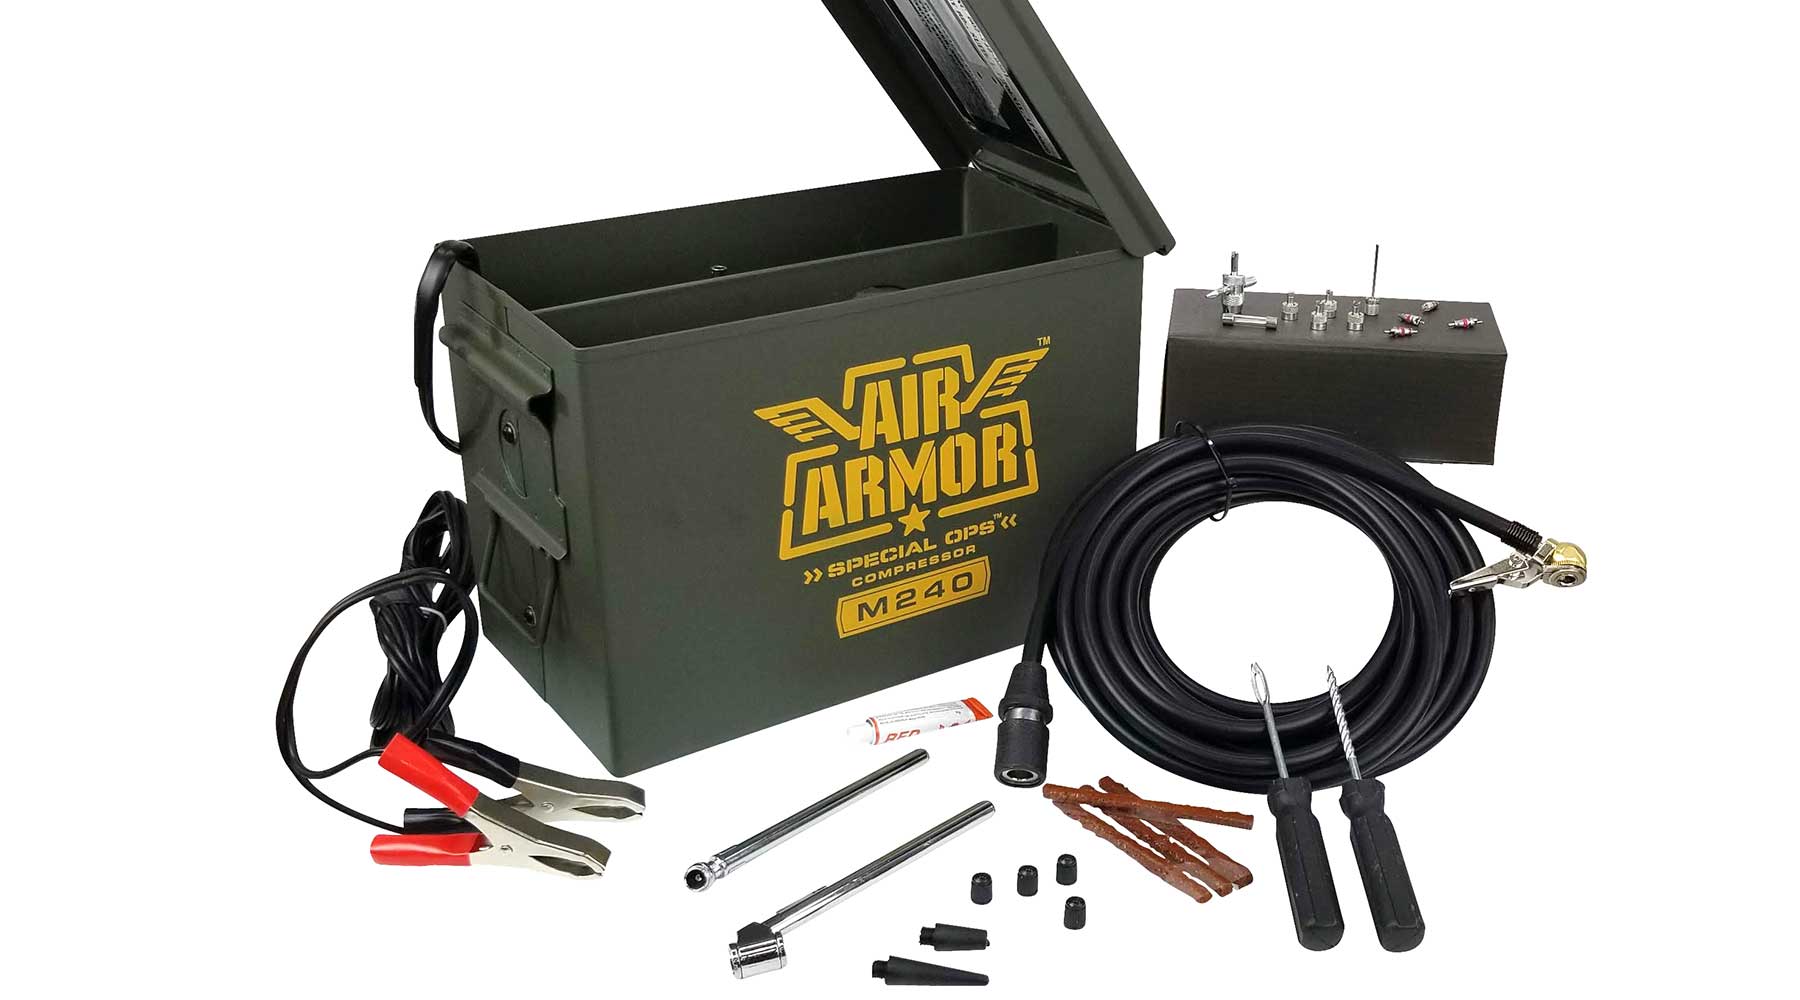 air armor m240 tire inflator with parts